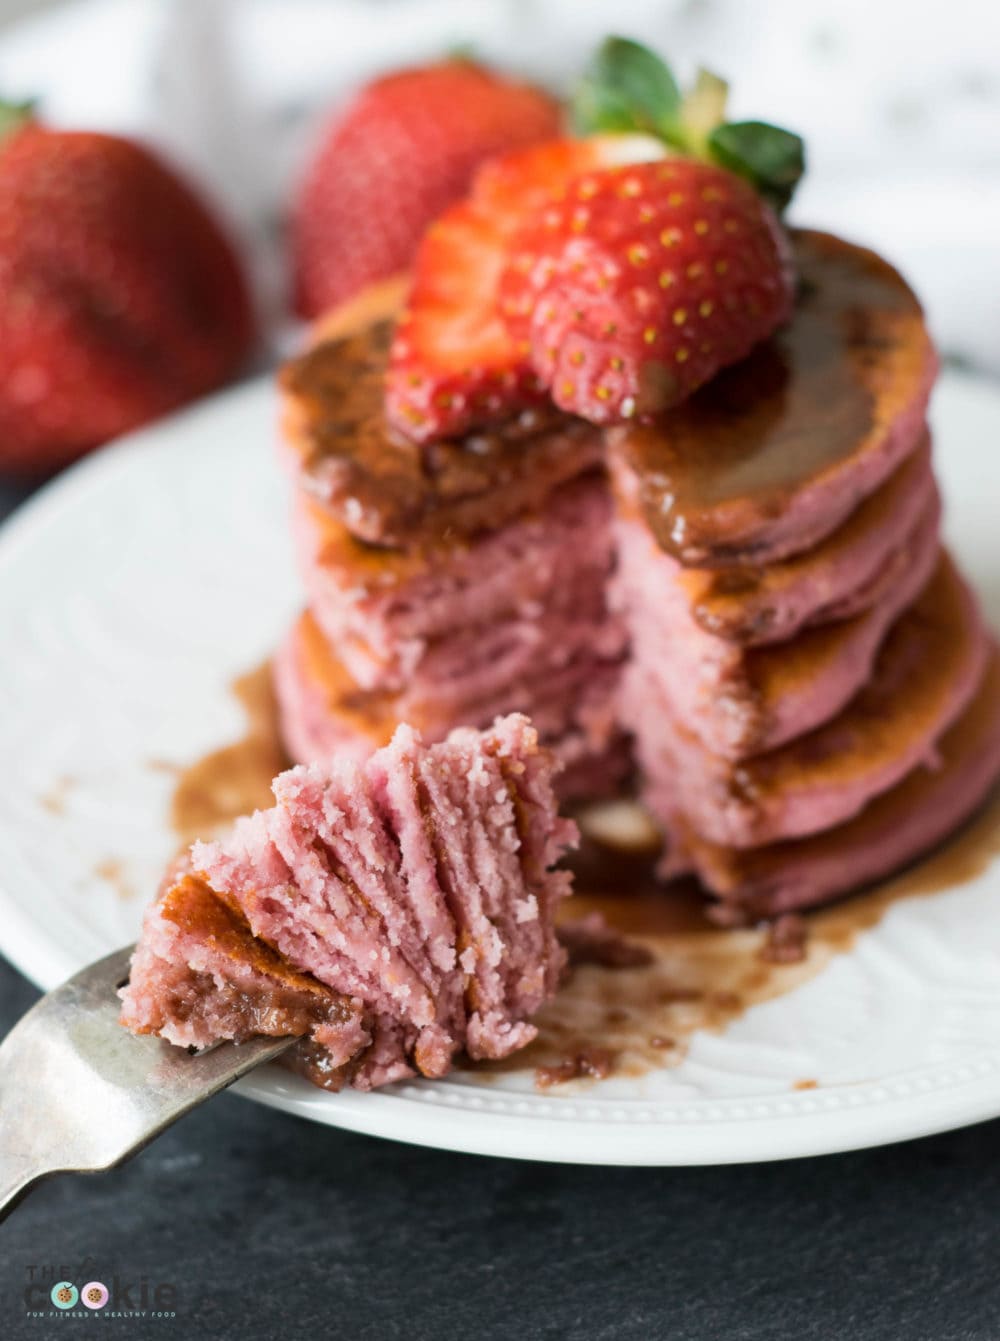 Strawberry Chocolate Pancakes naturally colored - no fake red dyes! (#GlutenFree & #Vegan) - @TheFitCookie #foodbloggenius